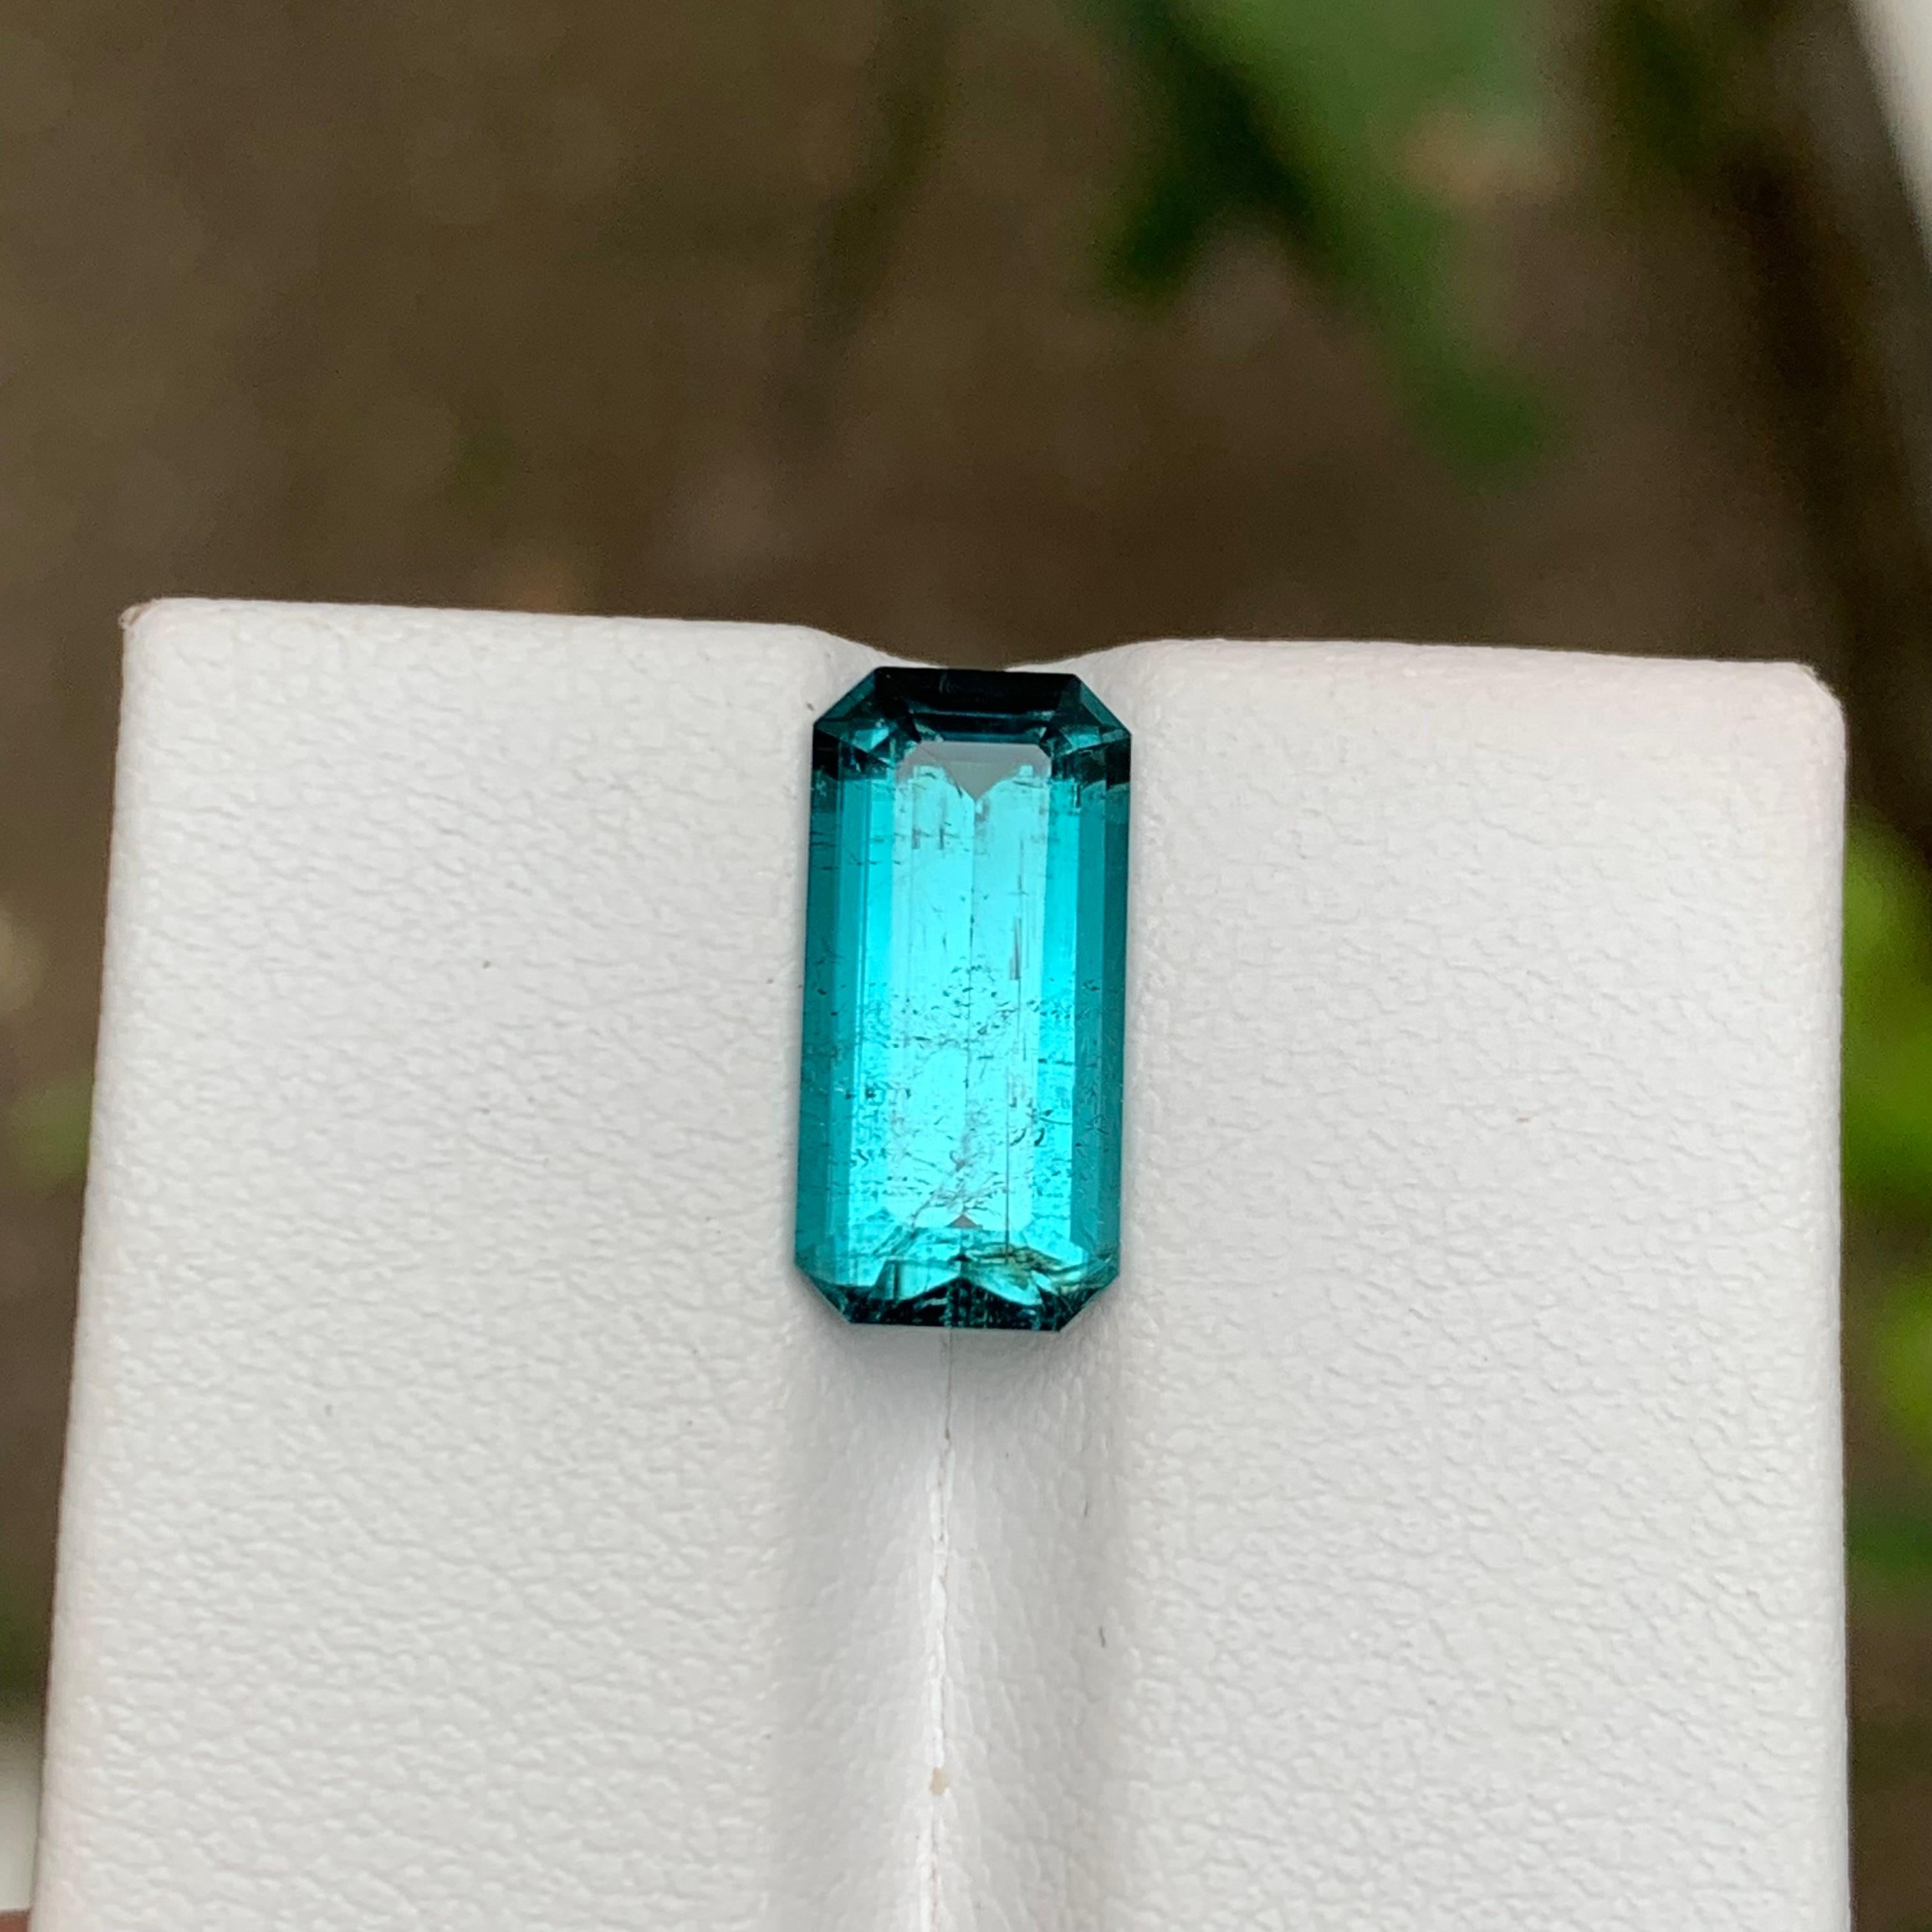 Rare Neon Blue Natural Tourmaline Gemstone, 4 Ct Emerald Cut for Ring/Jewelry AF For Sale 3